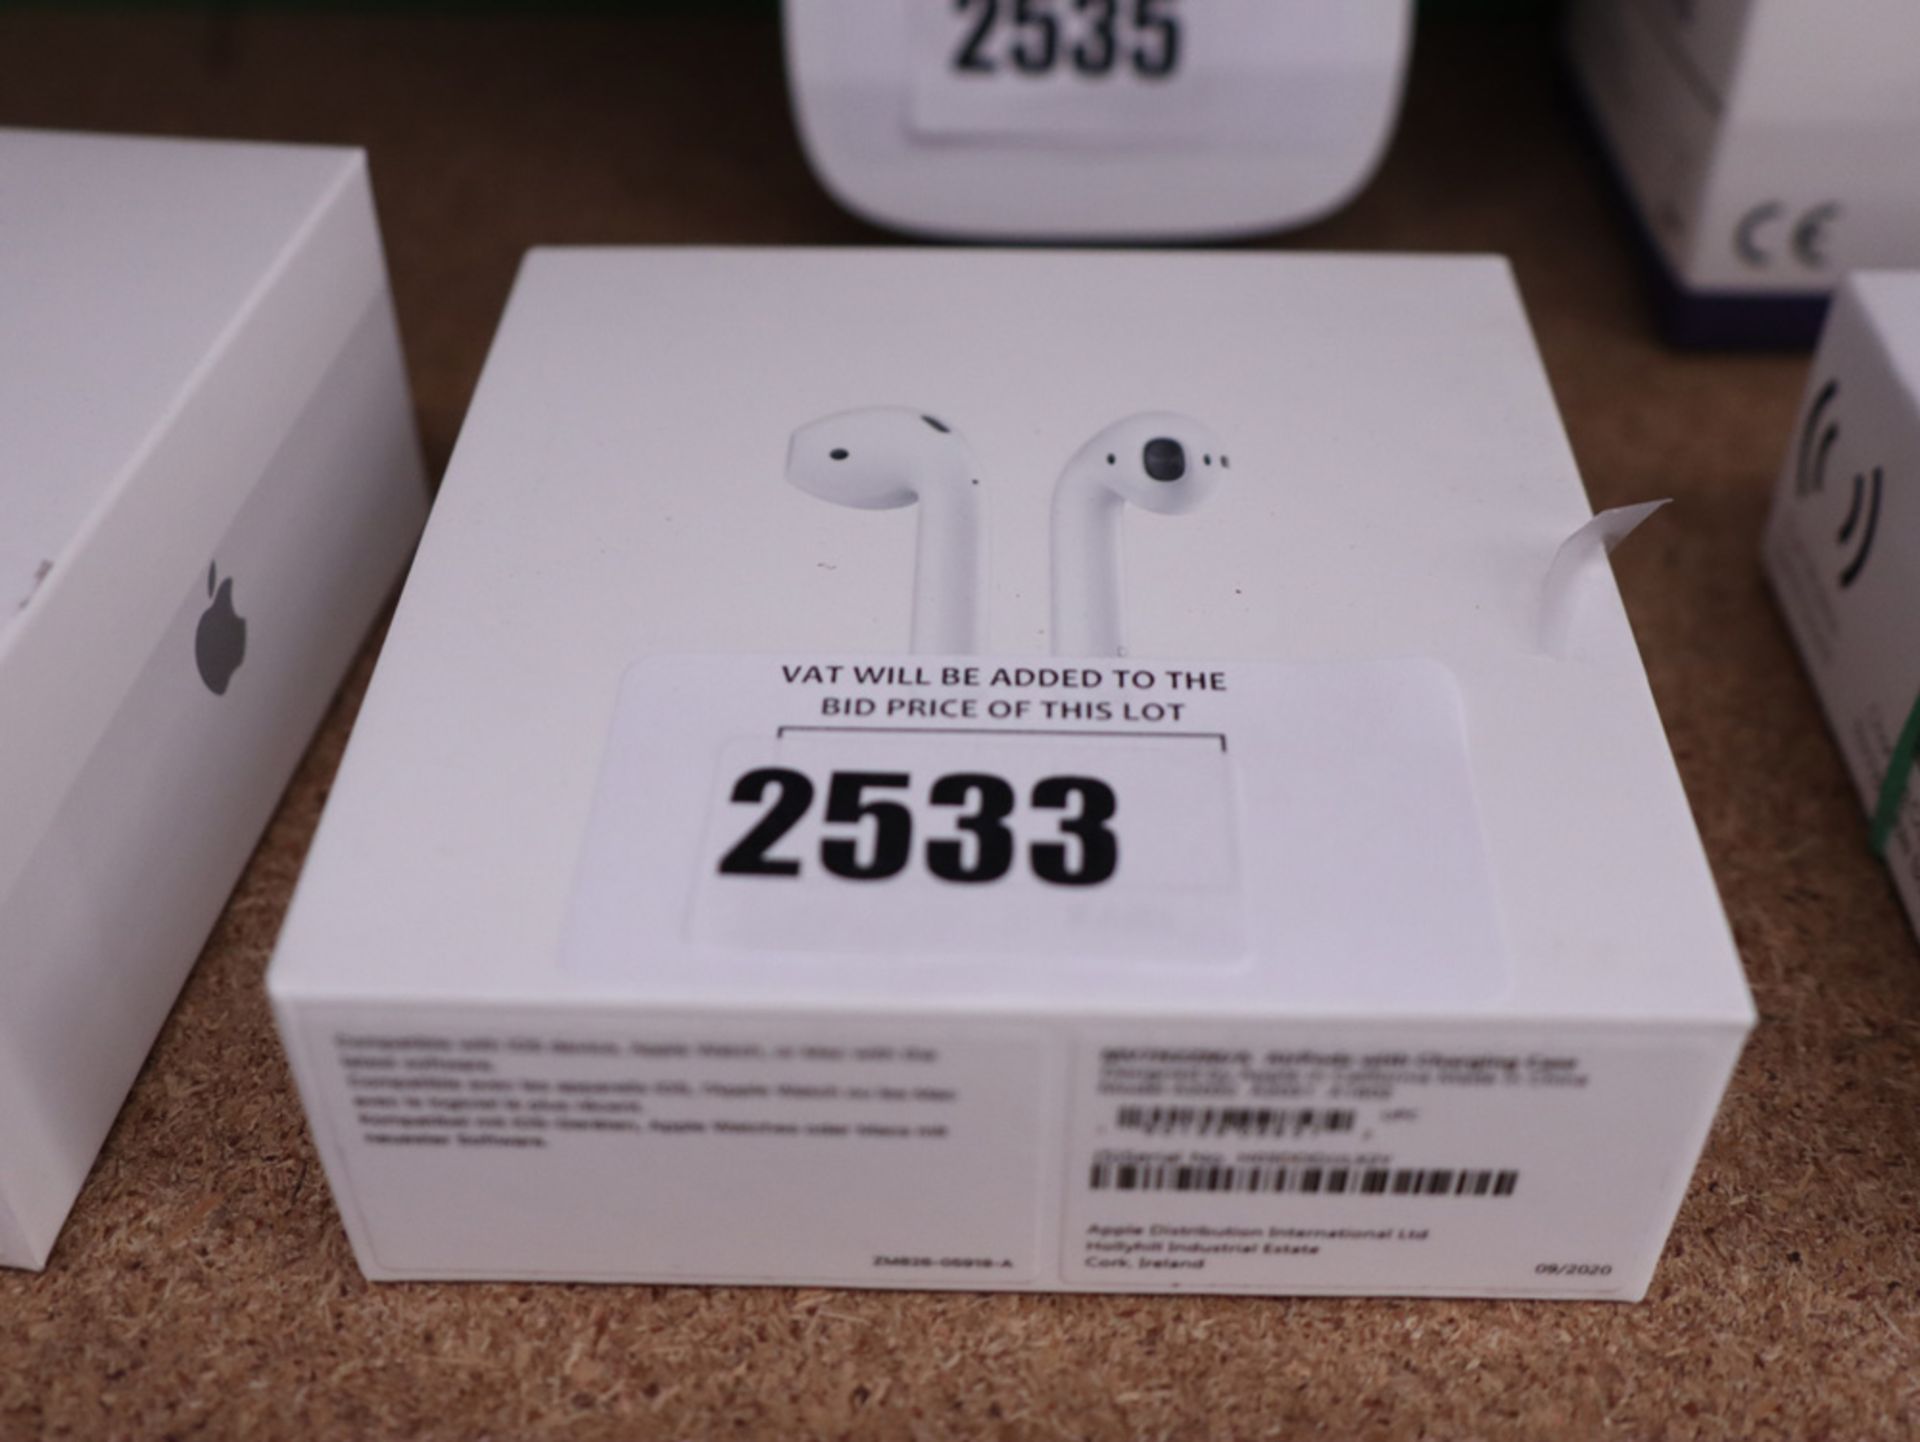 Boxed set of Apple wireless air buds